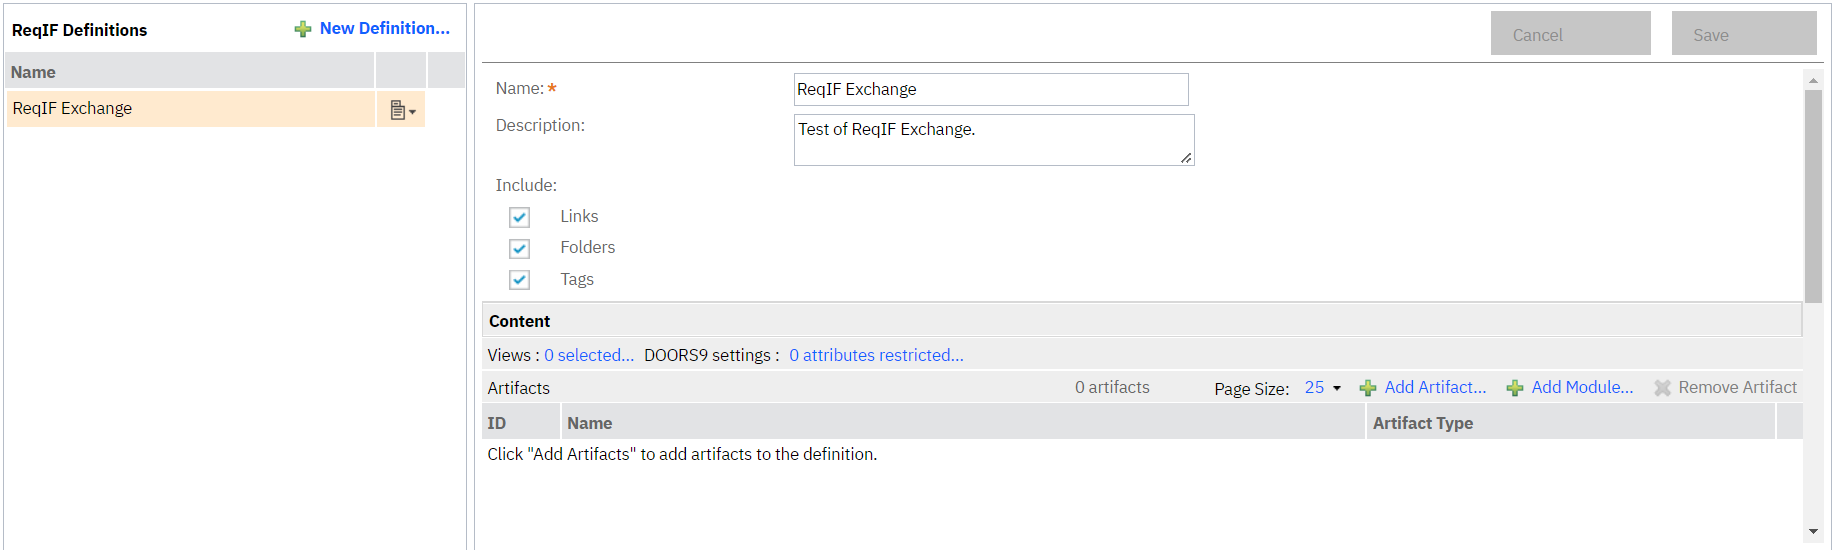 Interface of the ReqIF definitions window